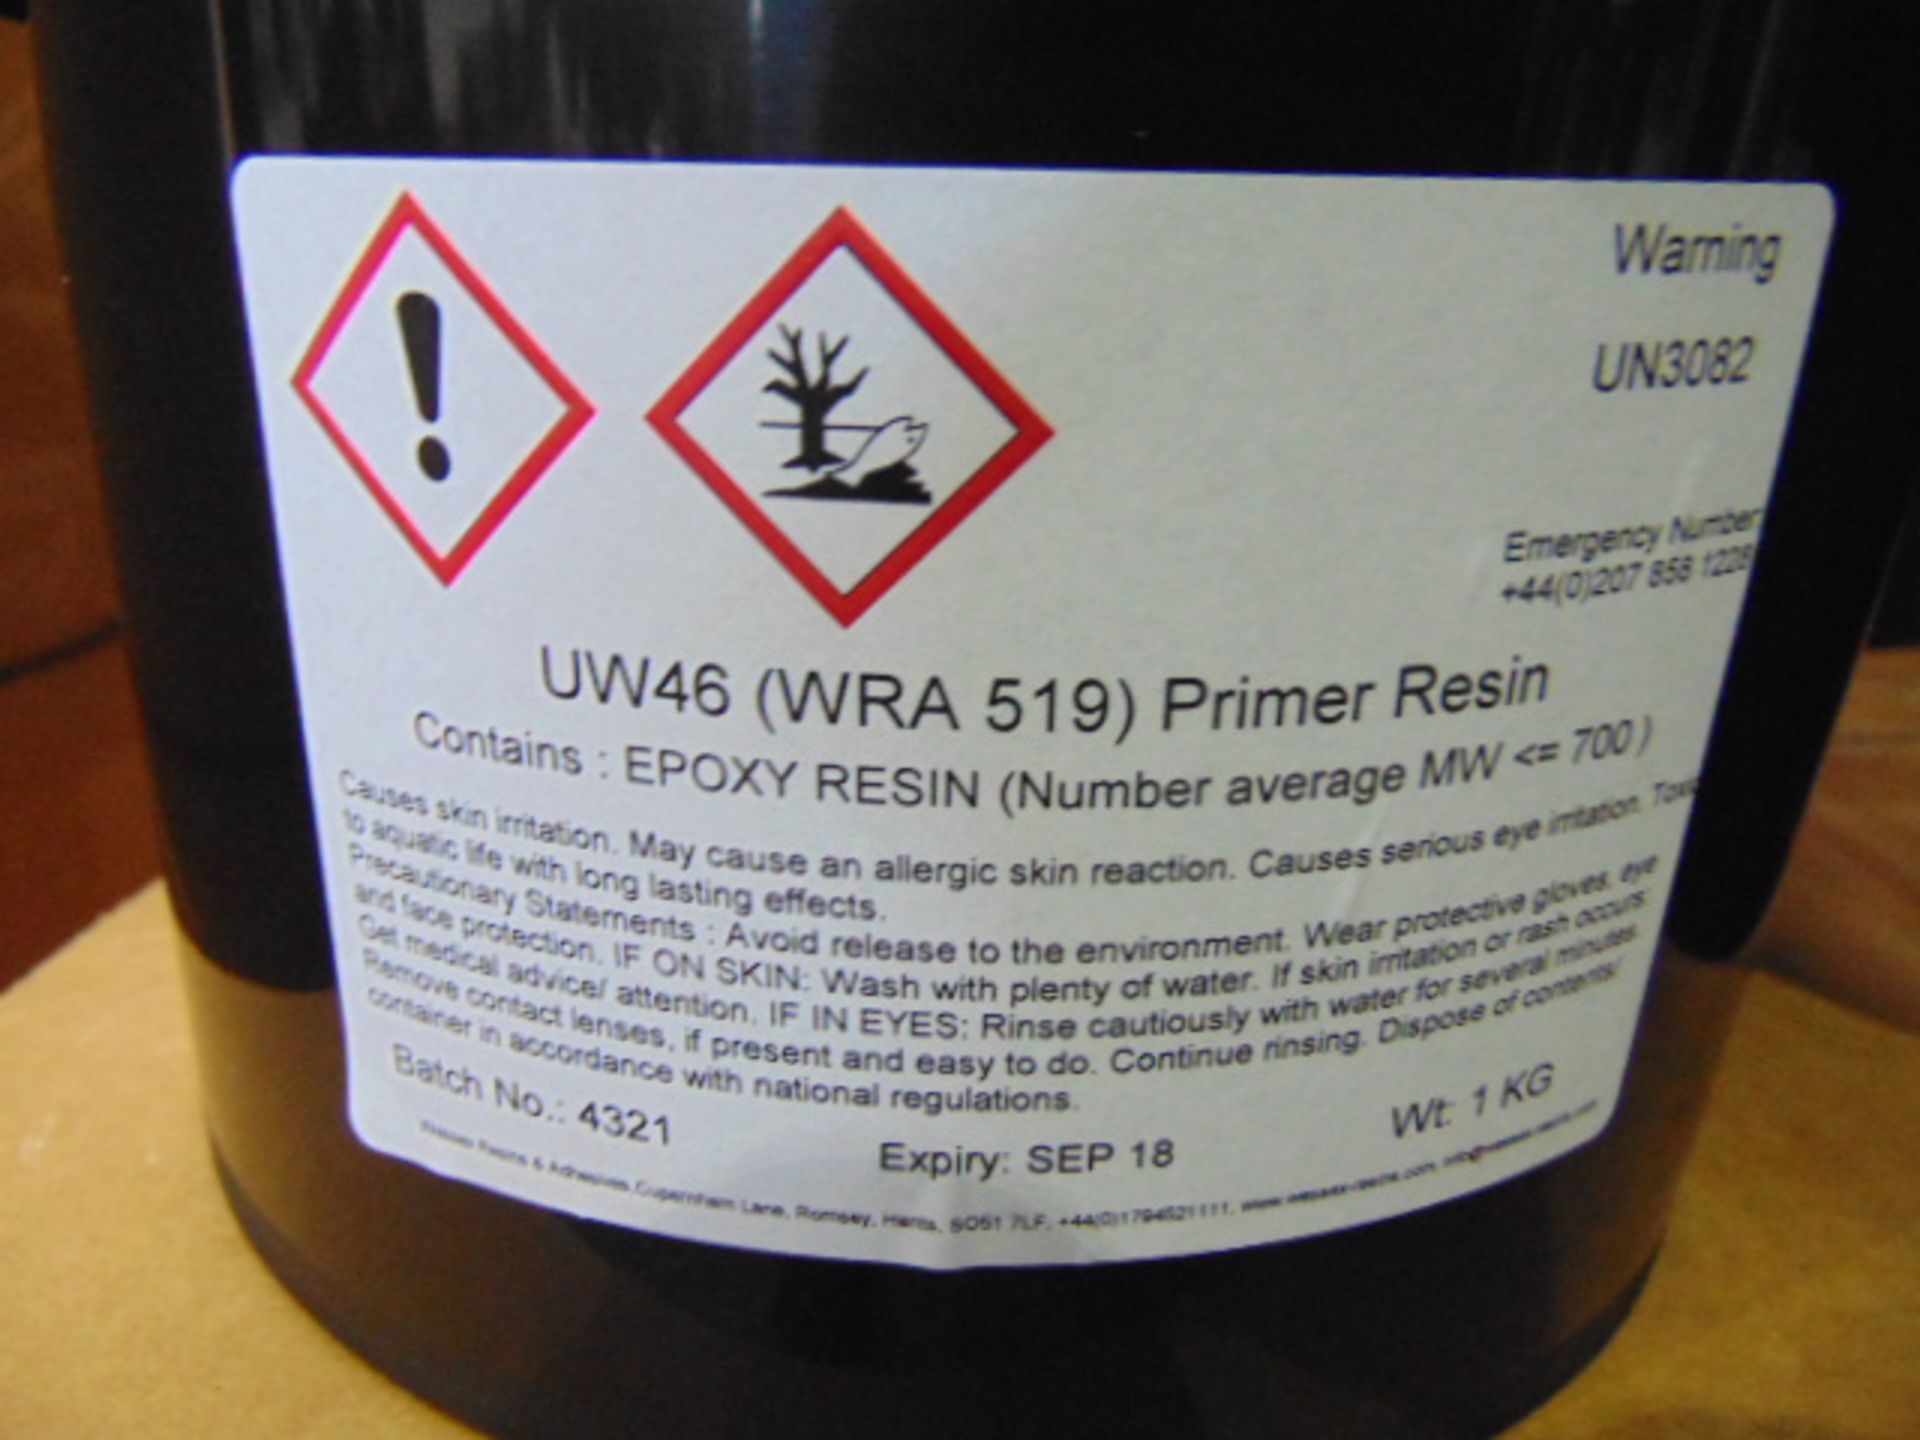 Approx 50 x Unissued Cans of UW46 (WRA519) Epoxy Resin - Image 3 of 4